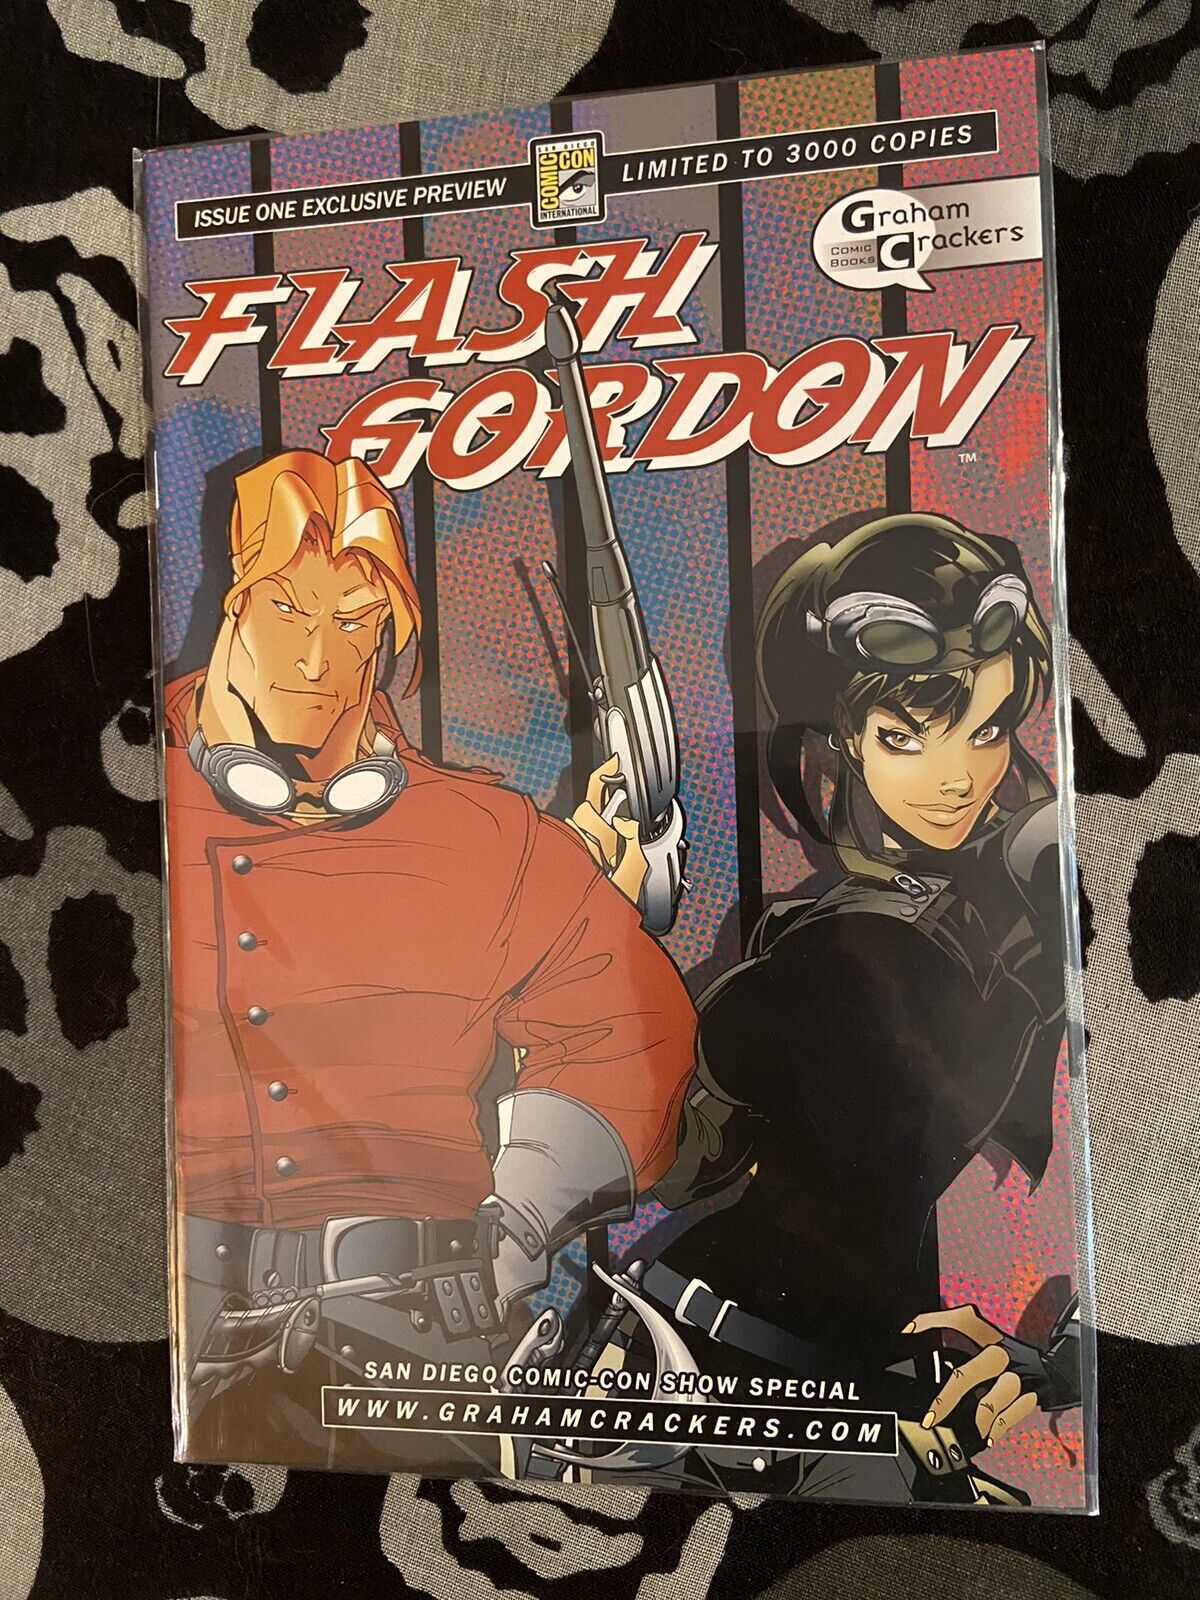 FLASH GORDON #1 (2008) SAN DIEGO COMIC CON EXCLUSIVE VARIANT SEALED IN POLYBAG